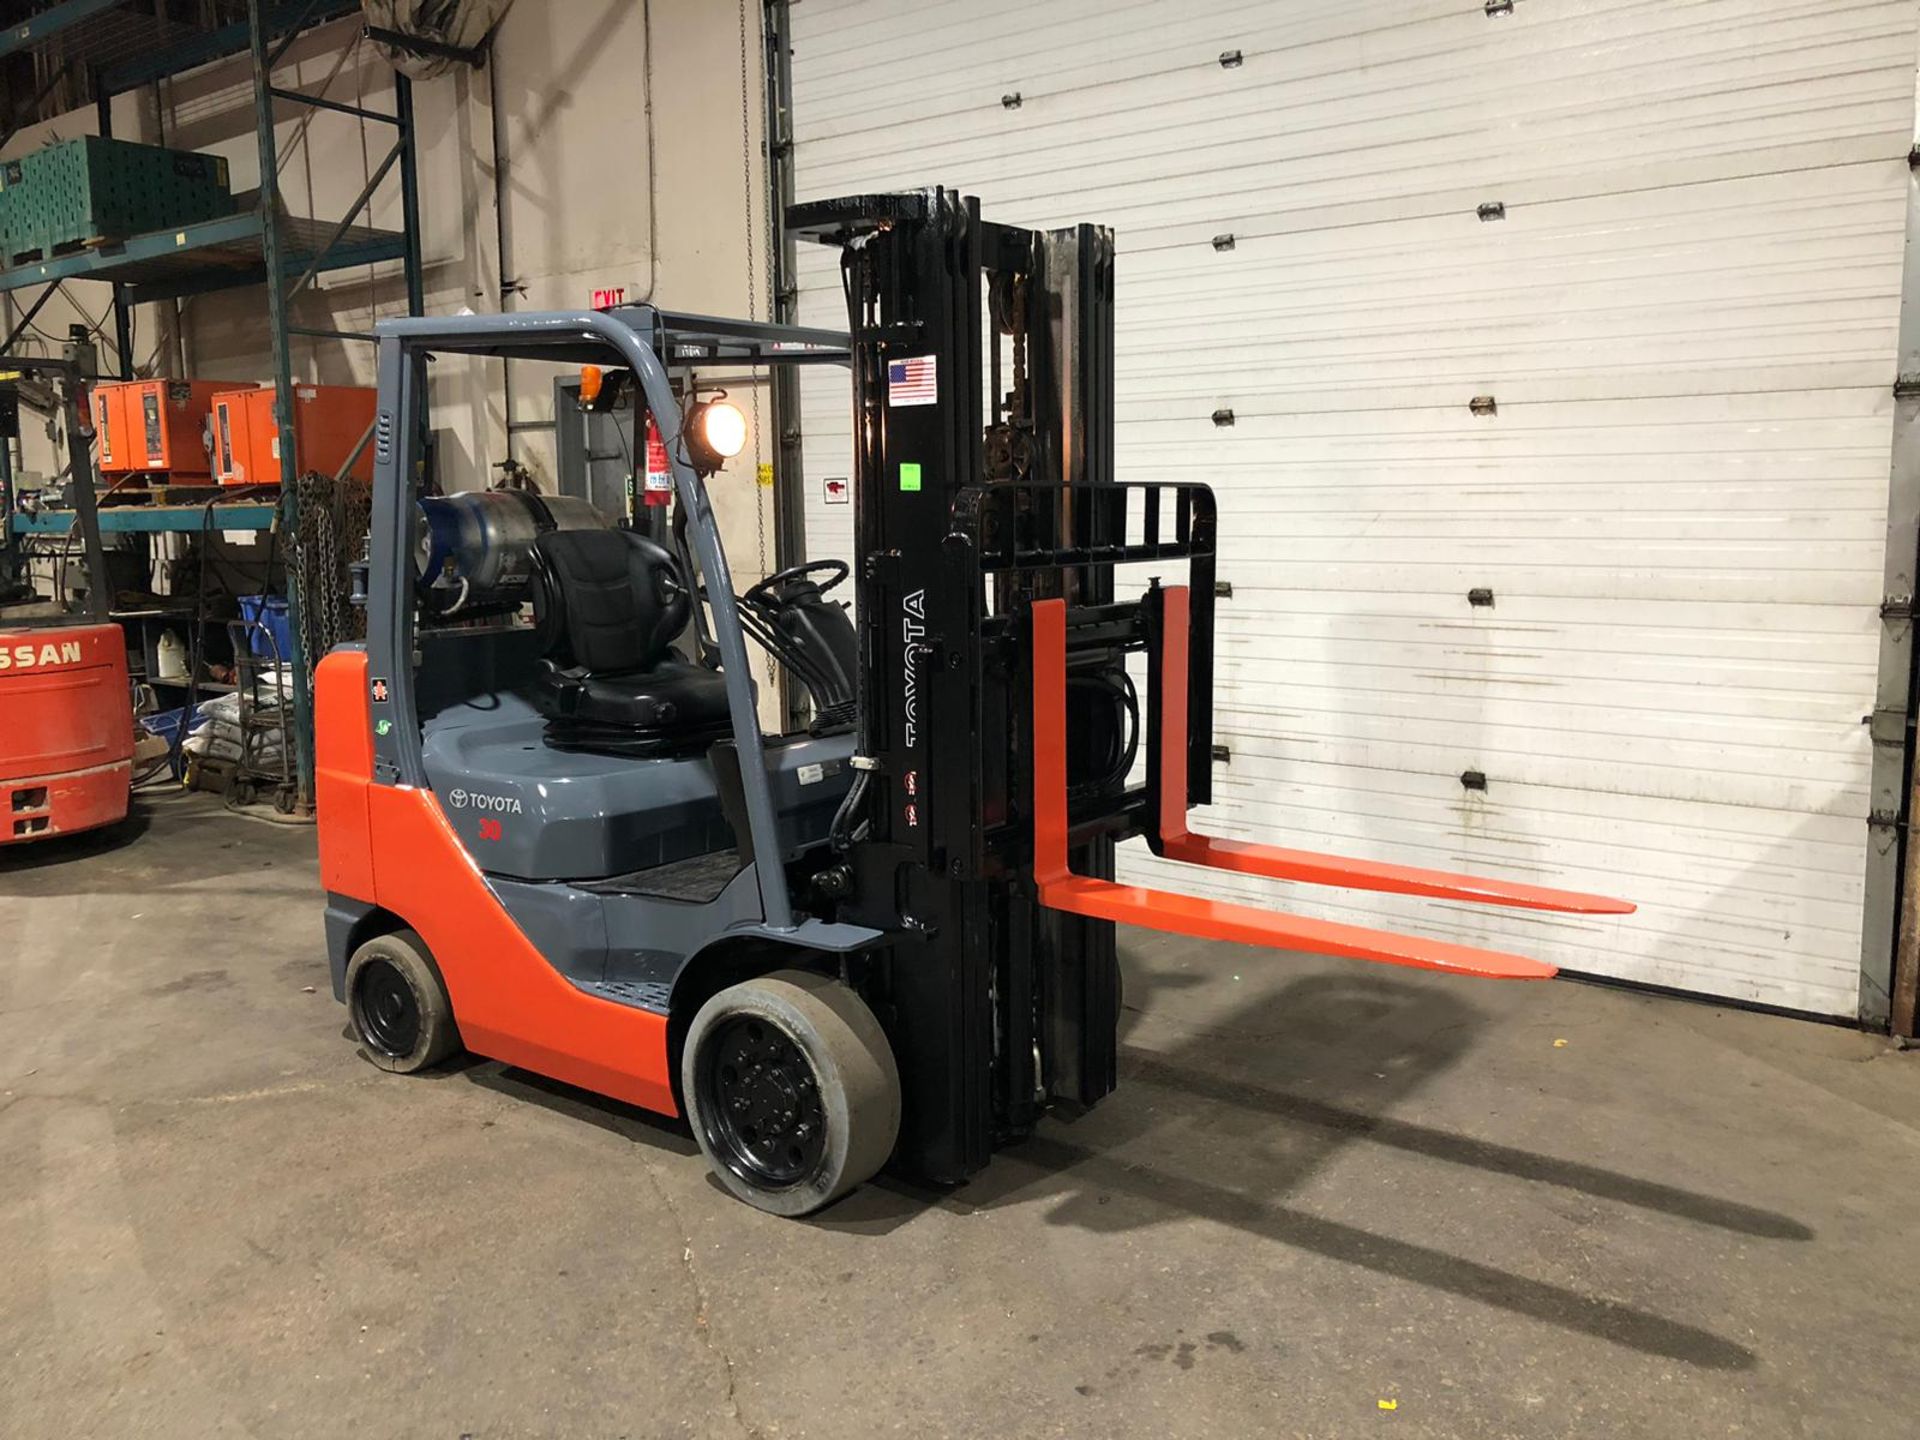 2012 Toyota 6,000lbs Capacity LPG (Propane) Forklift with sideshift and 3-STAGE MAST - Image 5 of 5